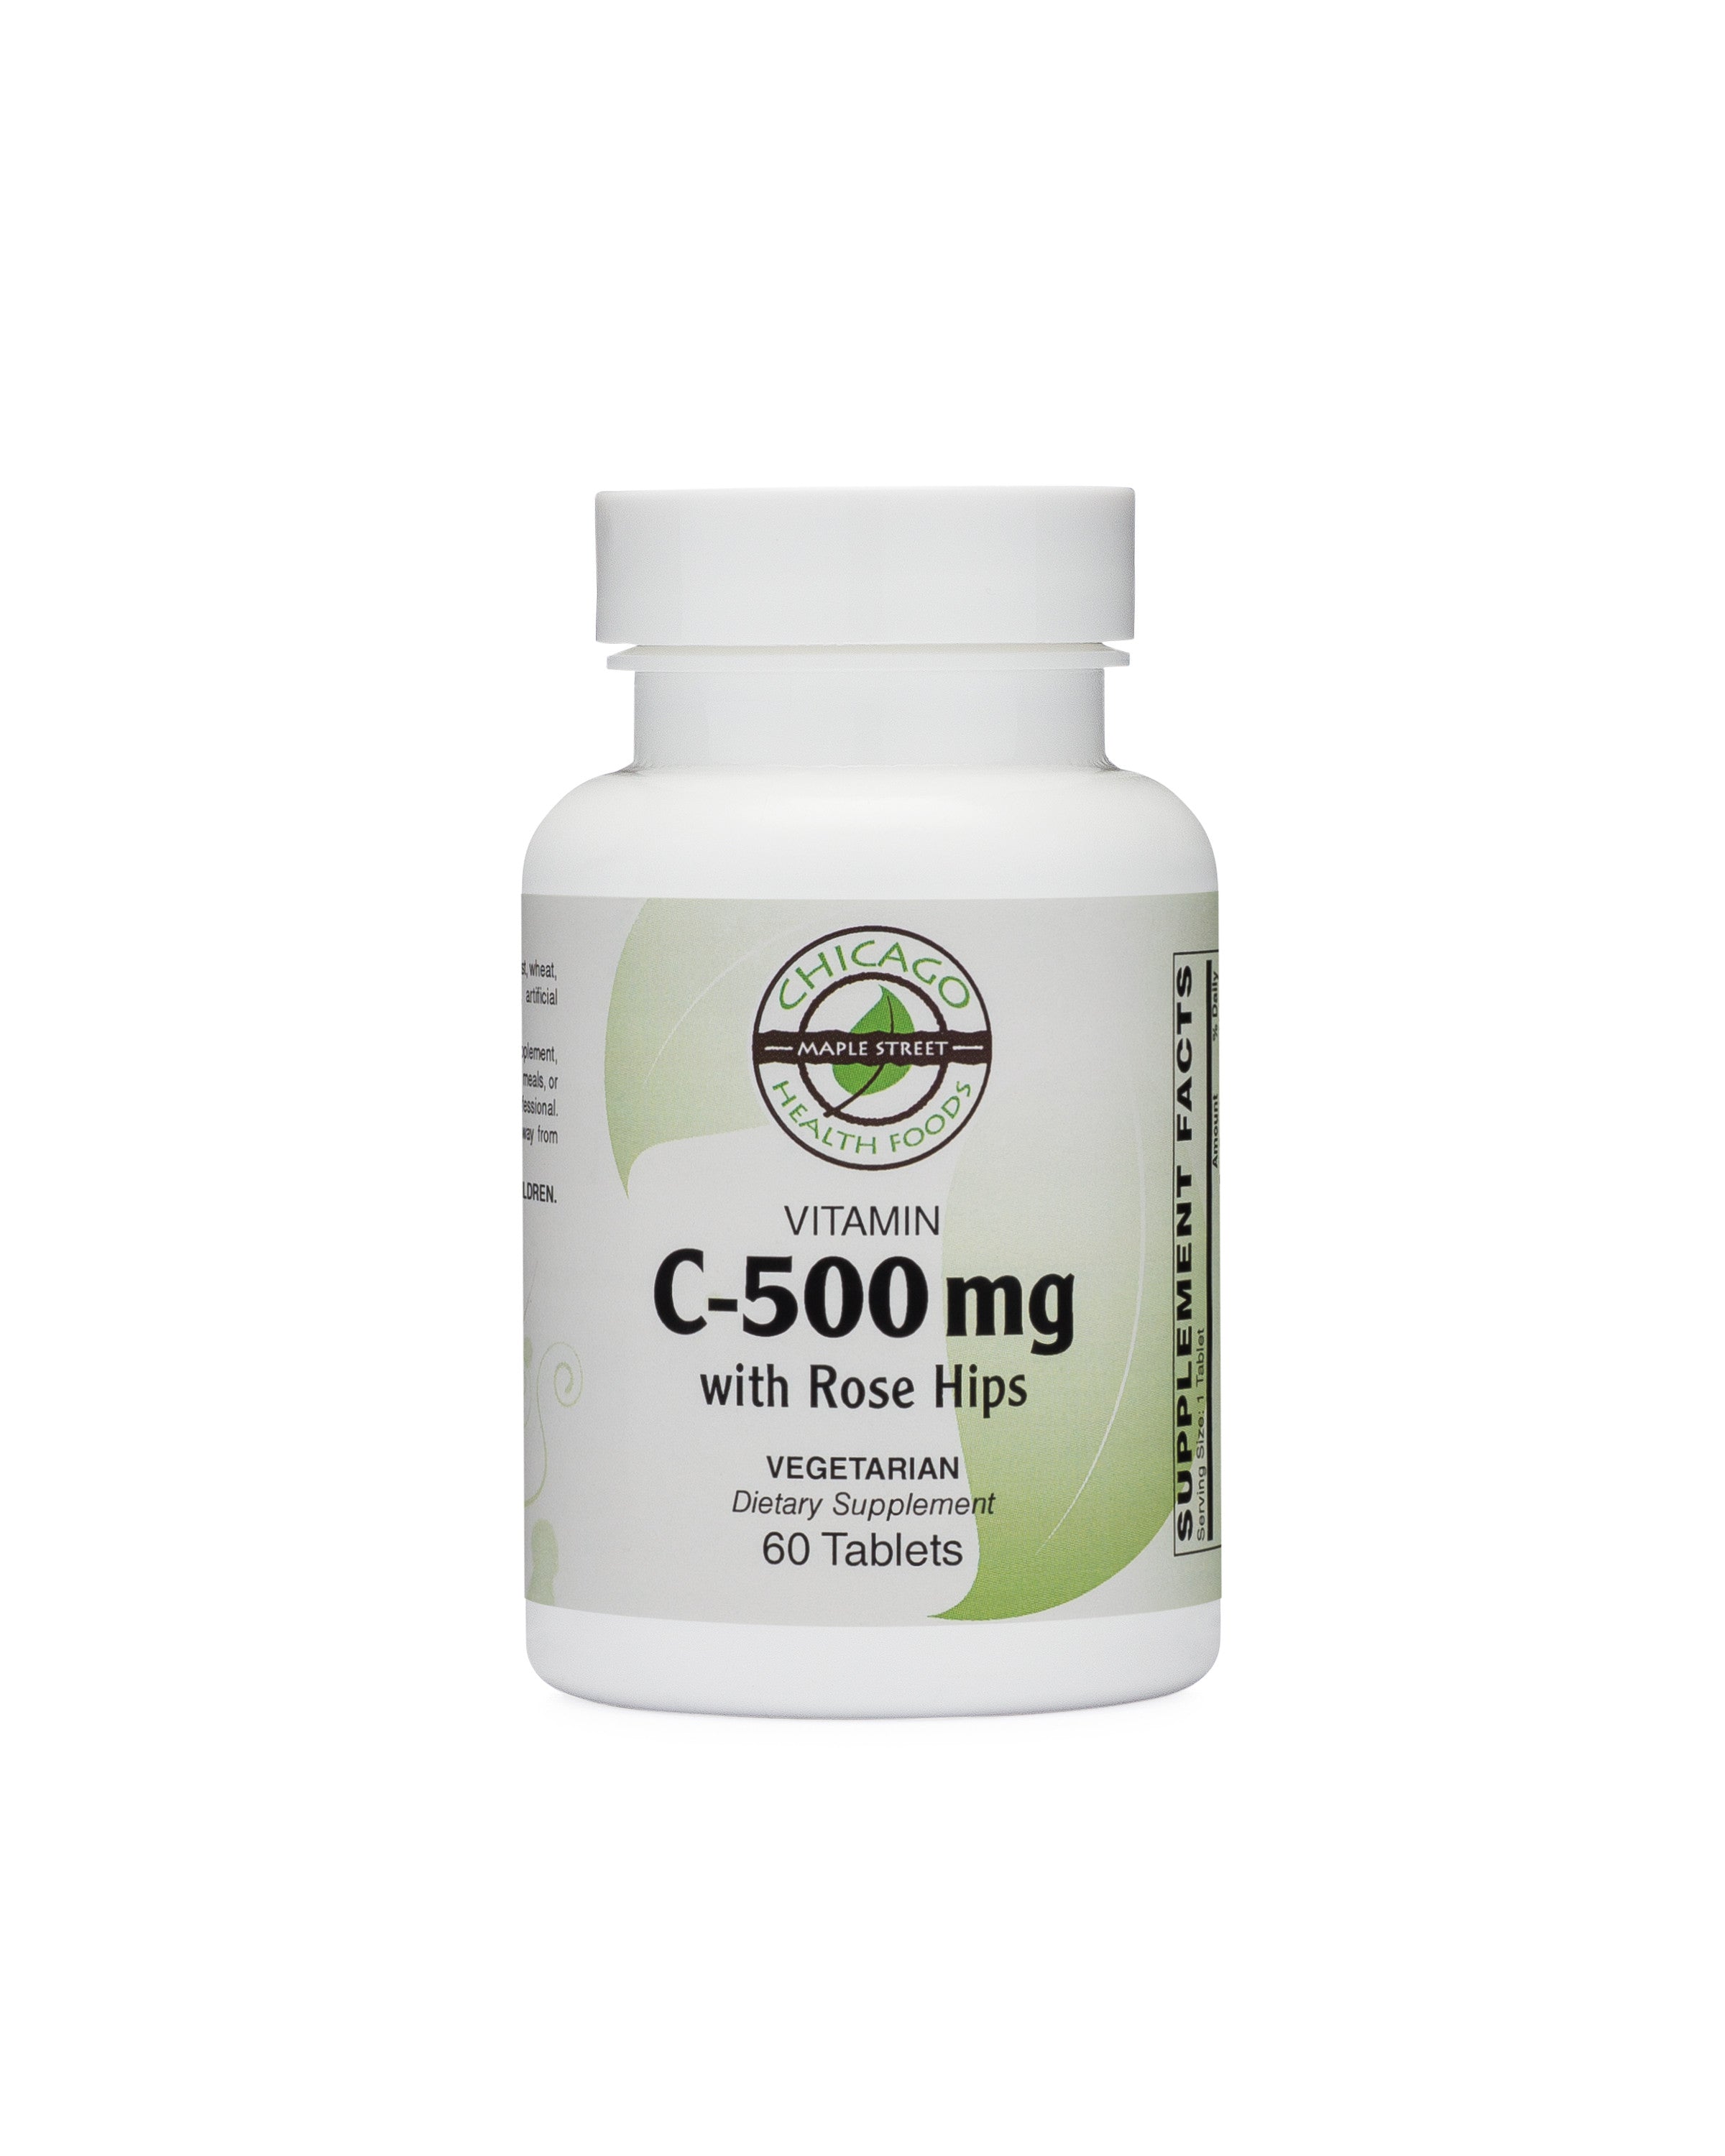 Vitamin C 500 Mg Chicago Health With Rose Hips 60 Tablets